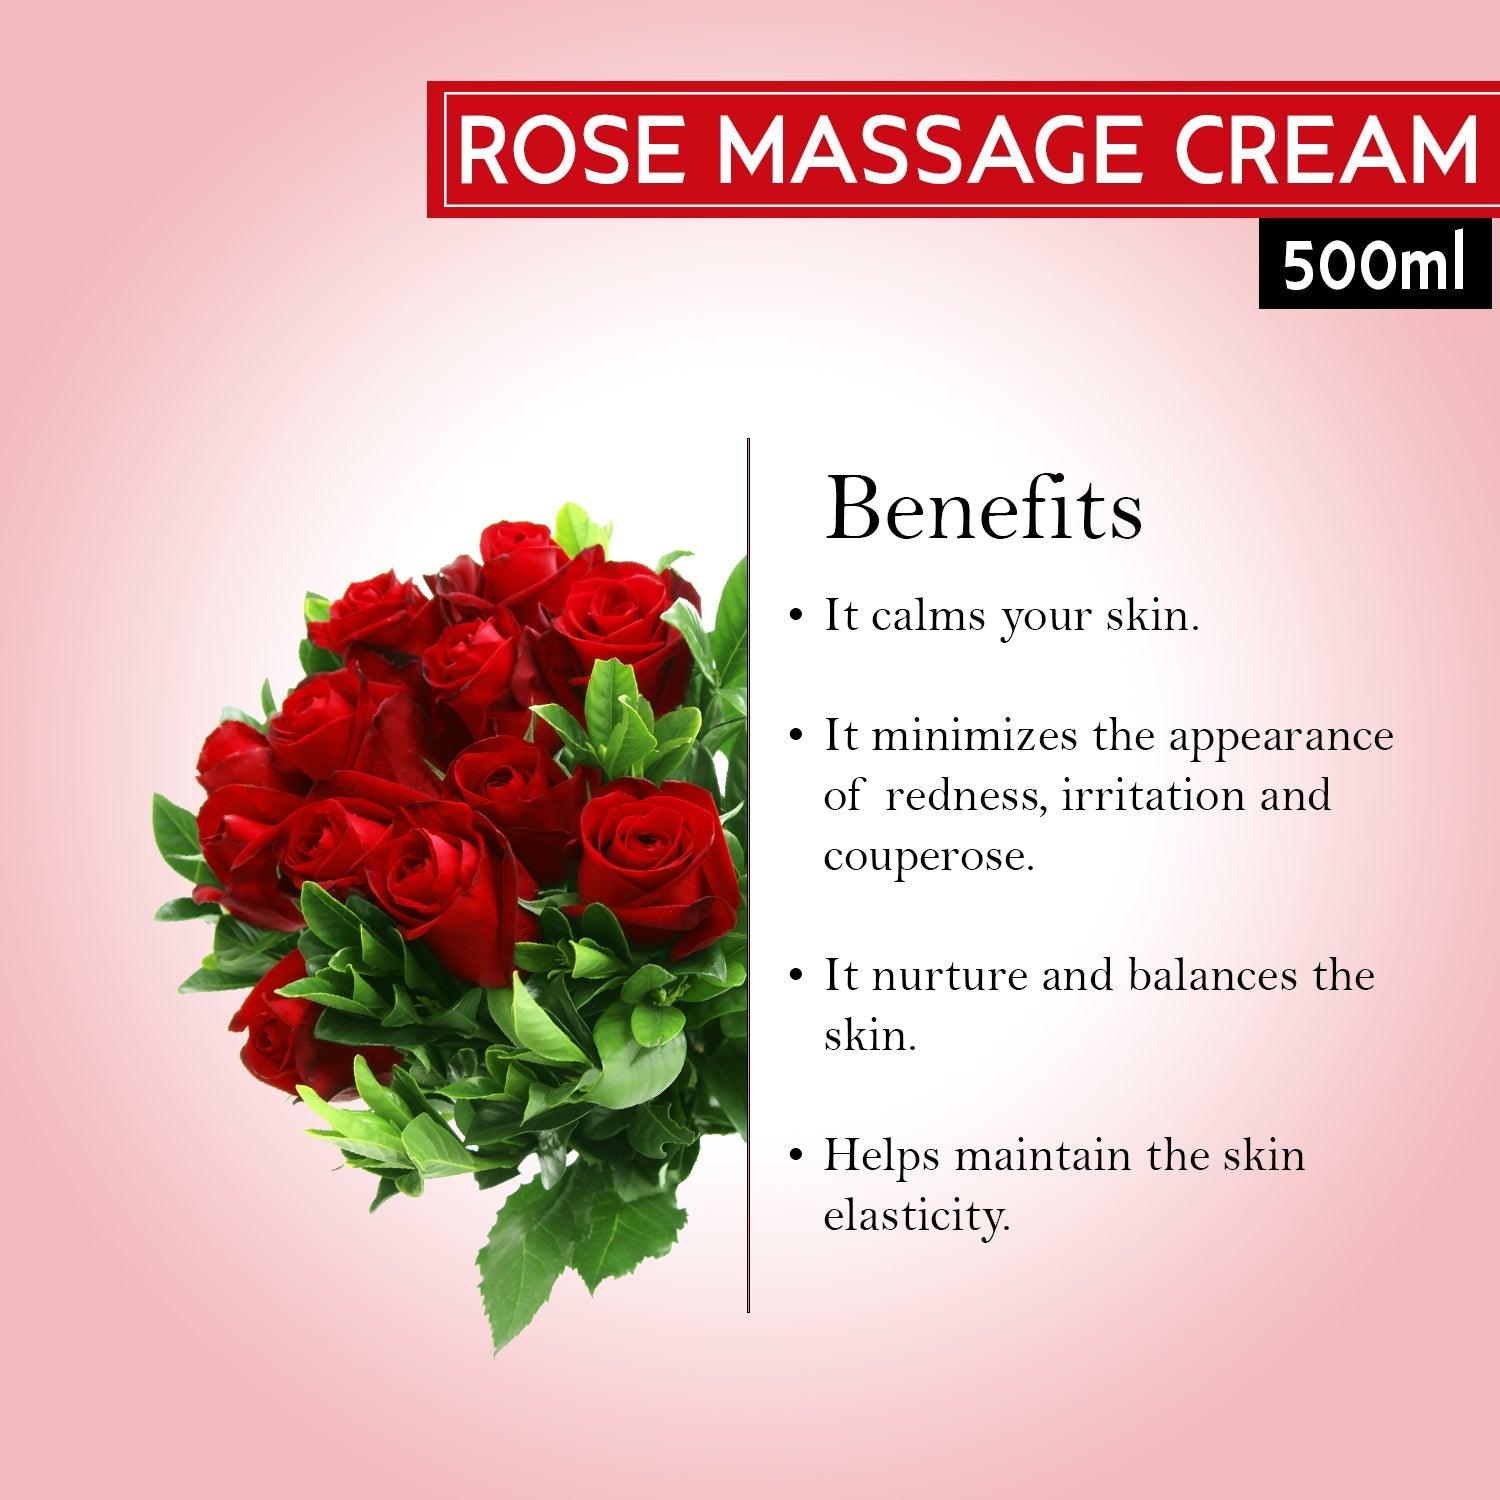 Rose Massage Face & Body Cream |improves skin tone, contracts muscles to give firm skin & prevents wrinkles 500ml - Pink Root